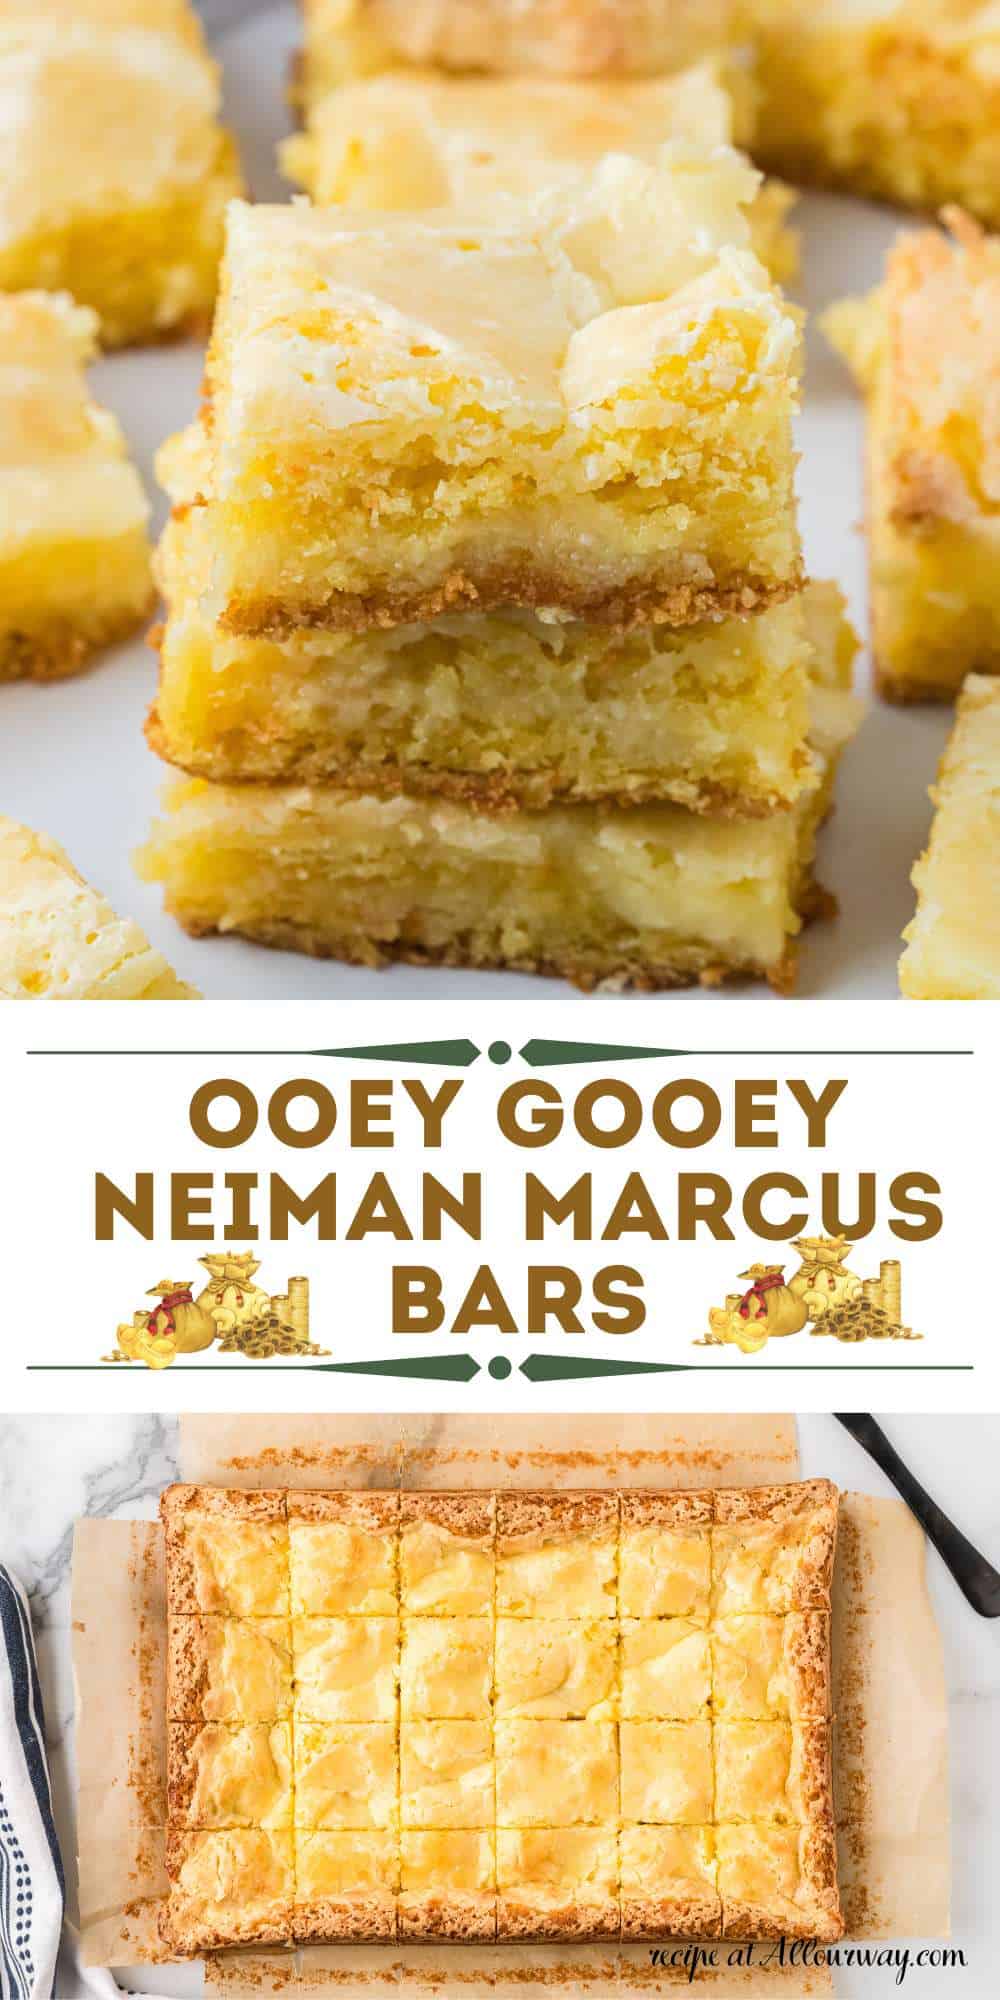 These Neiman Marcus Ooey Gooey Bars are a treat for the senses. They have a rich, buttery base topped with a creamy, sweet layer that melts in your mouth. Perfetto, for a quick dessert or a party snack, they'll have everyone say, "Grazie mille!"